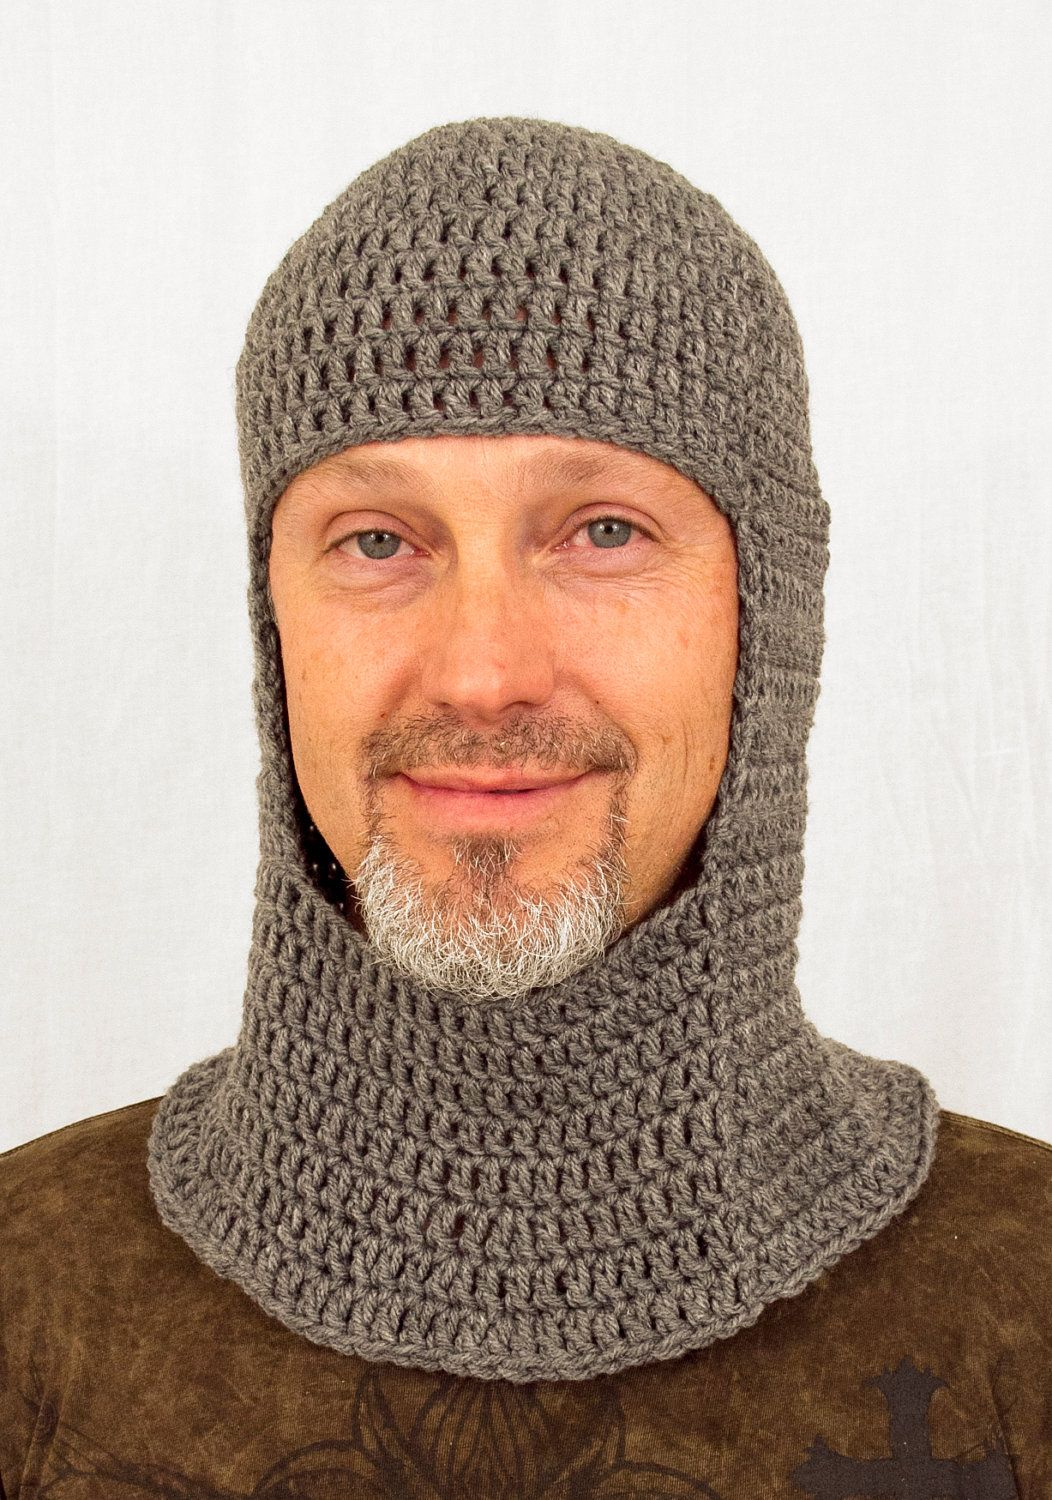 Chainmail Crochet Pattern Medieval Knight Coif Hat Crochet Grey Chain Mail Send Size Choice